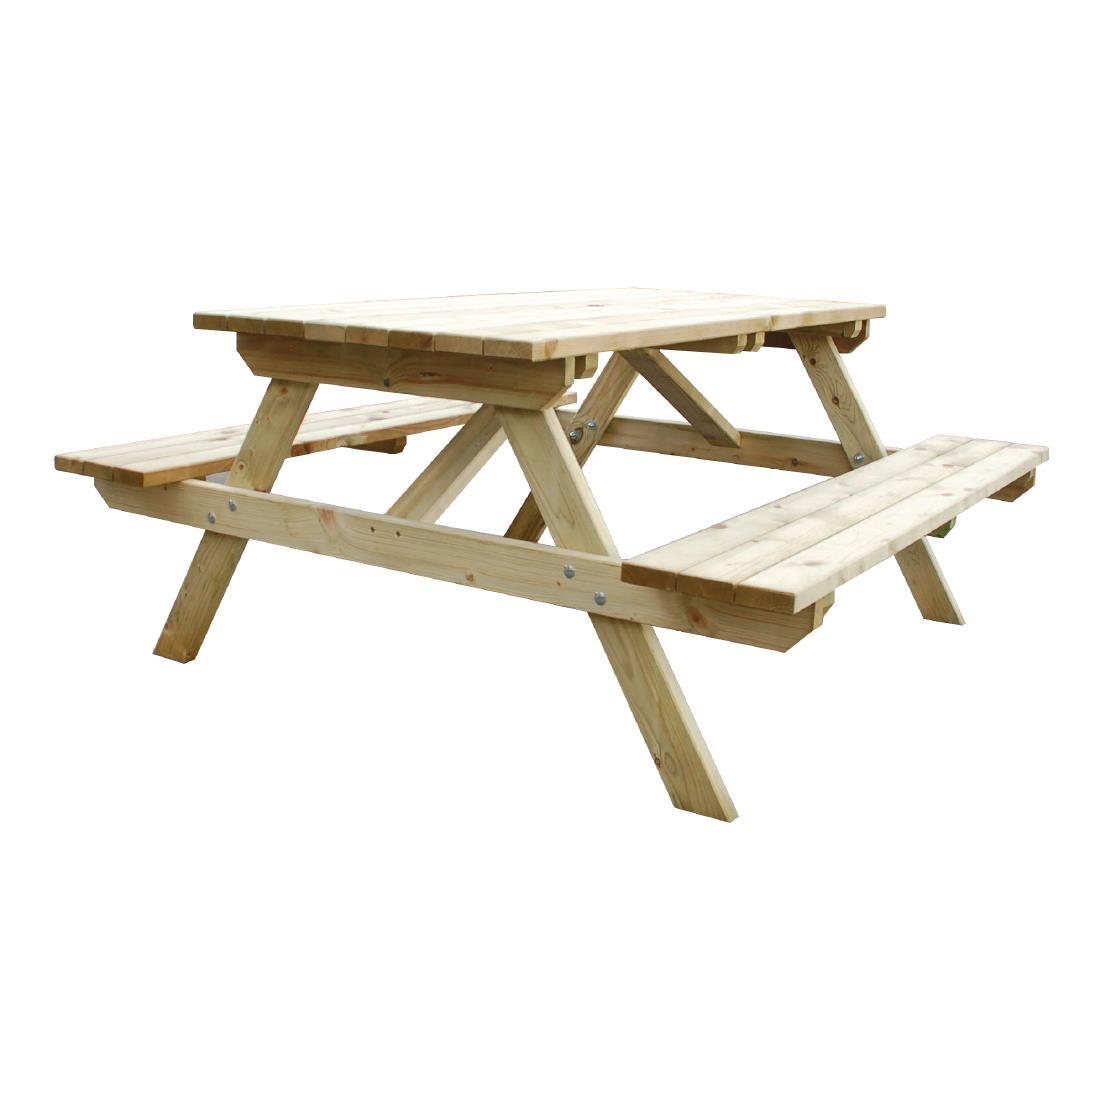 Rowlinson Wooden Picnic Bench 5ft - CG095  - 3